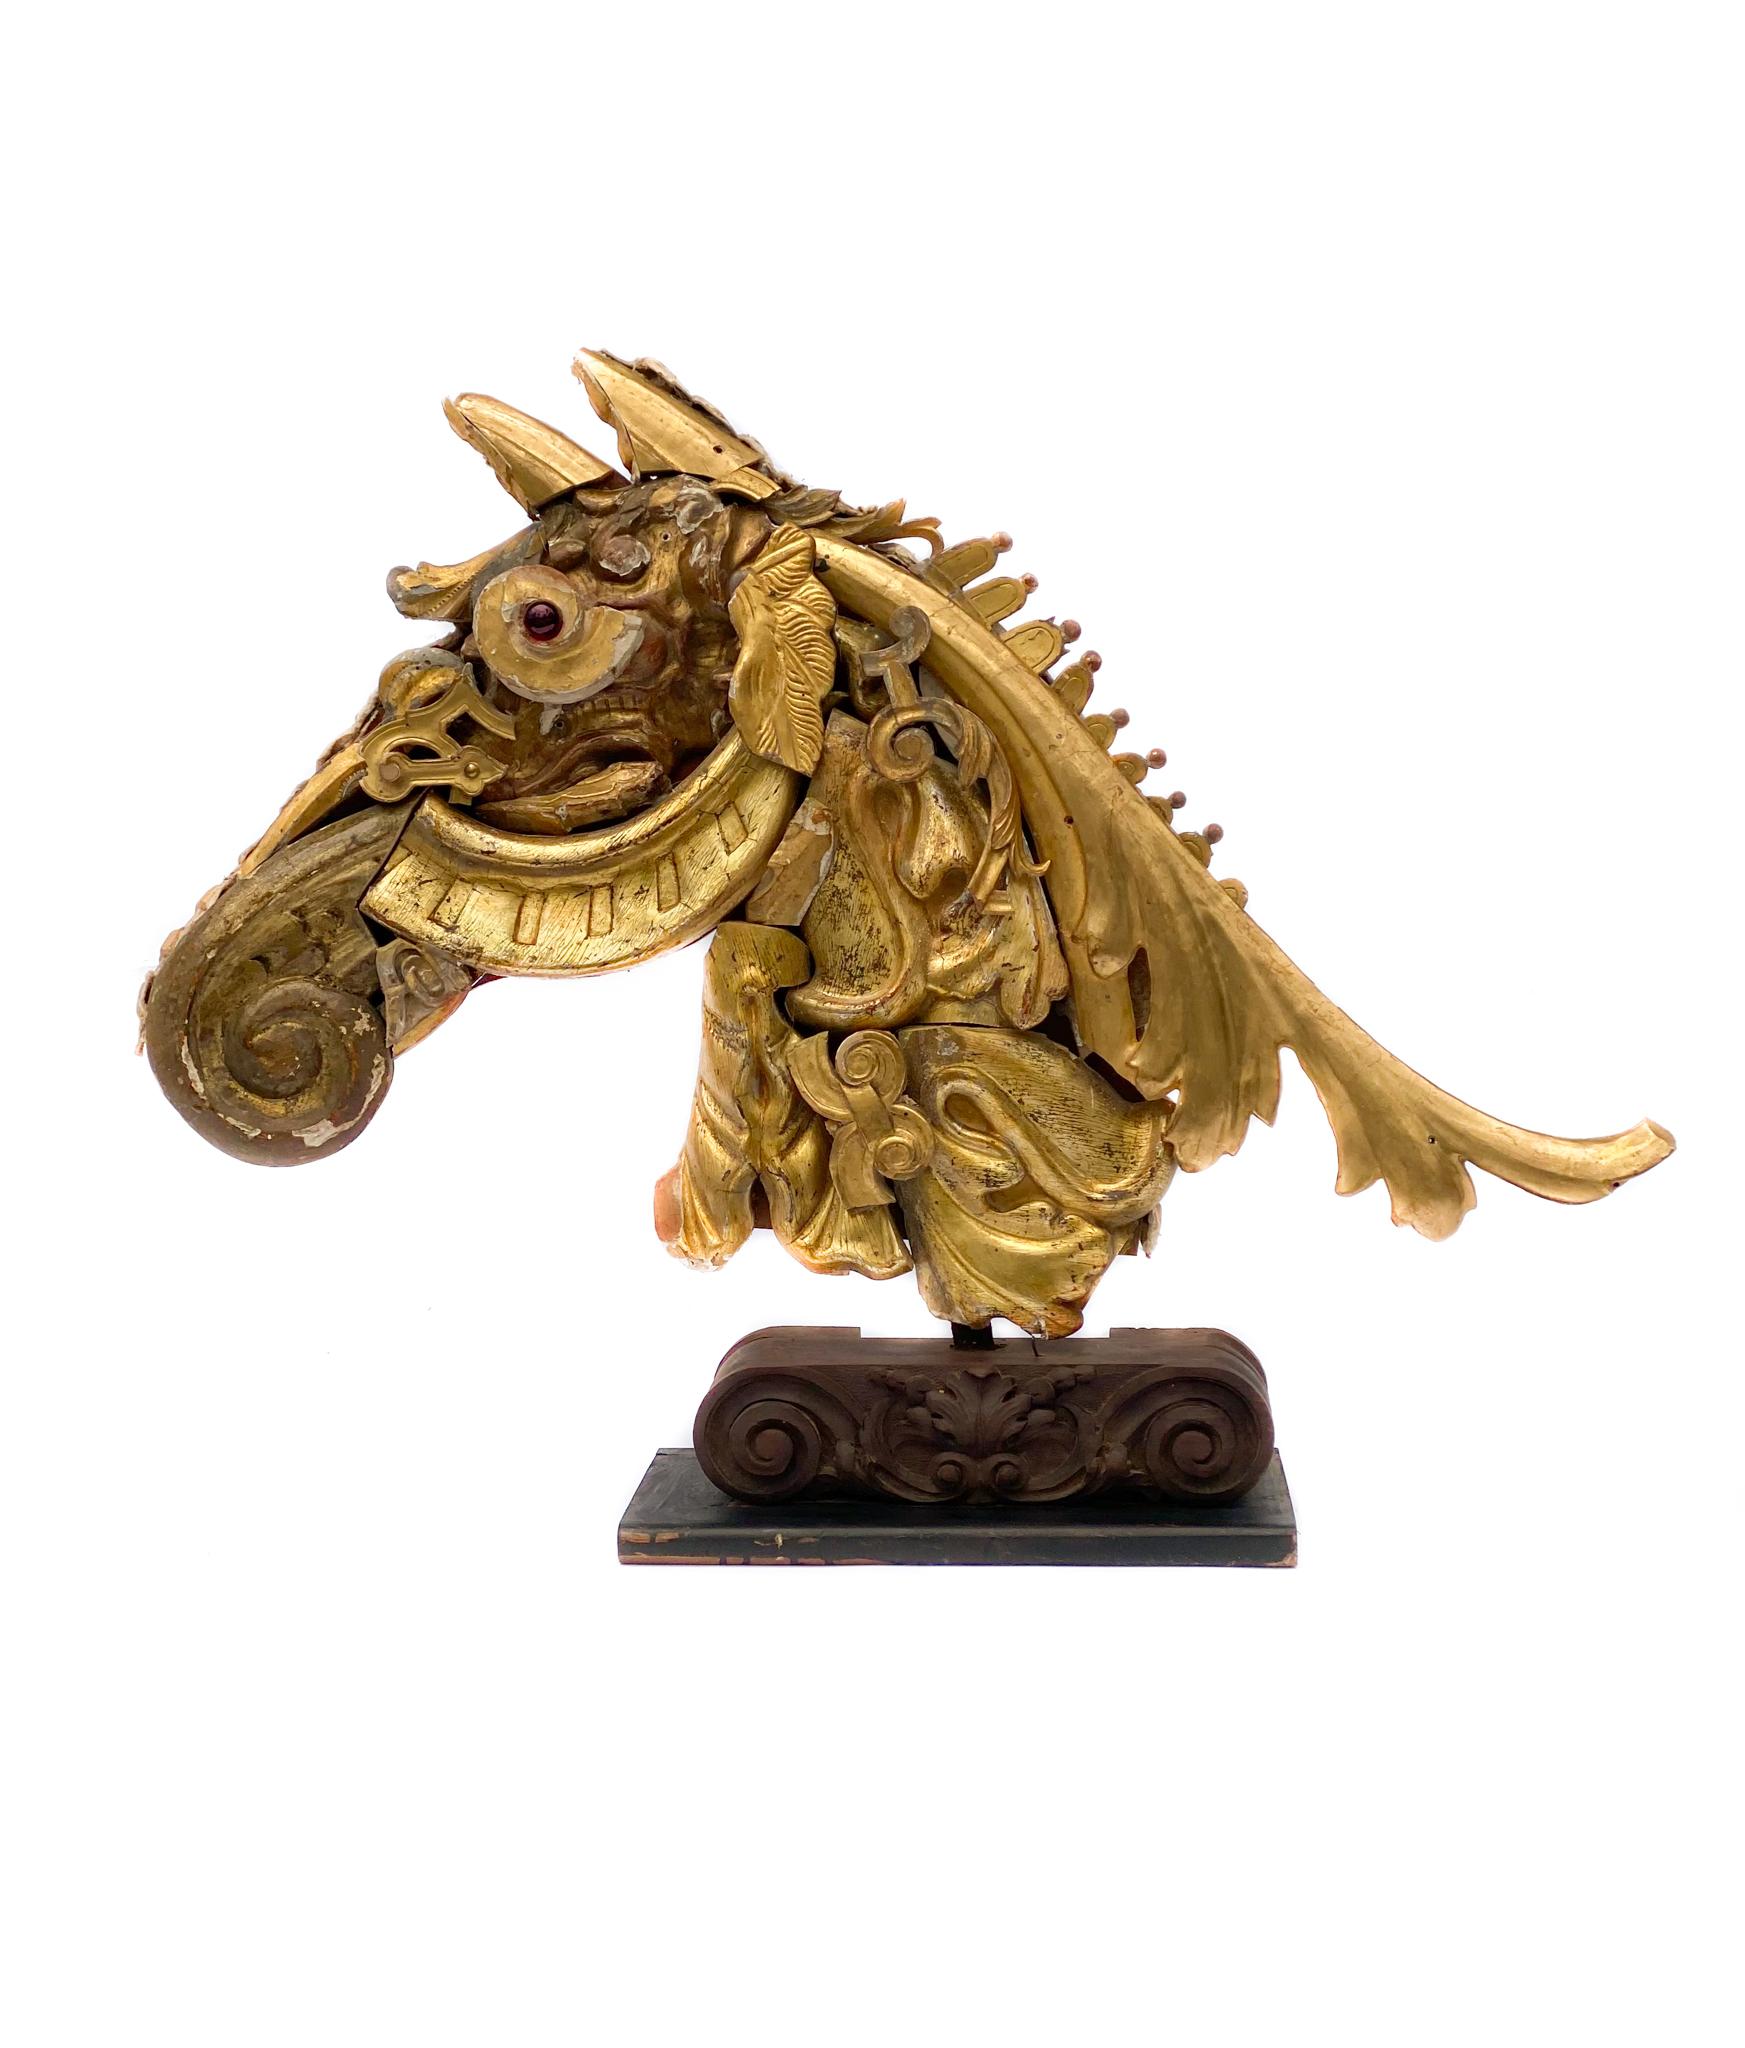 Pair of 18th century Italian gold-leaf fragment horse head sculptures.

The pair is made of 18th century Italian water-gilt fragments mounted on scroll wood bases. The fragments come from historic churches, buildings, and pieces from Tuscany. The